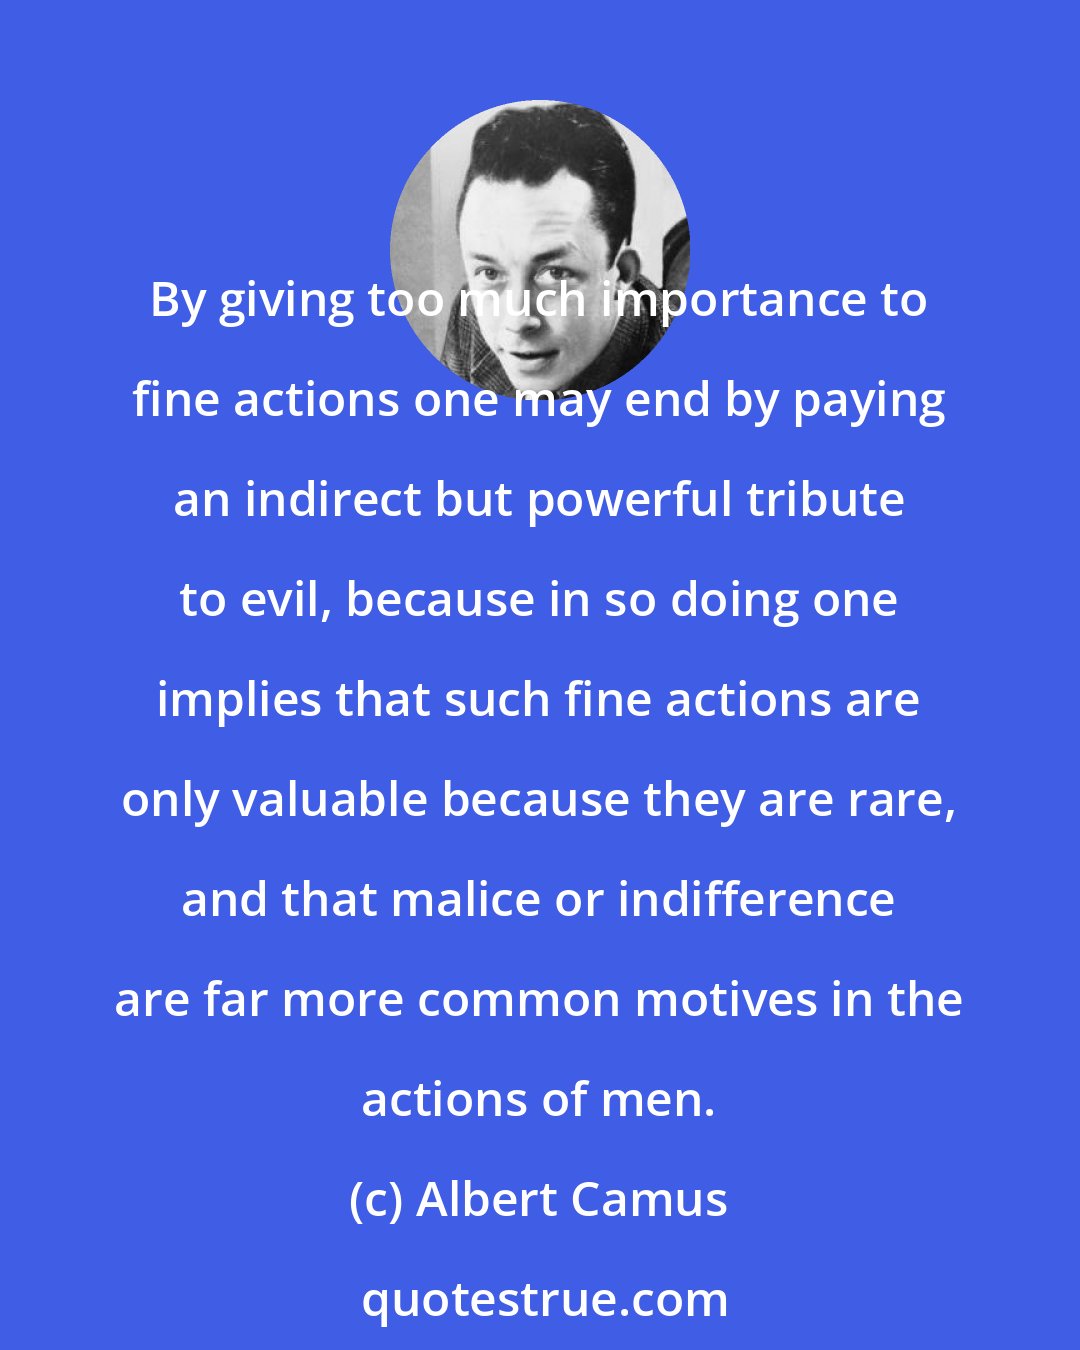 Albert Camus: By giving too much importance to fine actions one may end by paying an indirect but powerful tribute to evil, because in so doing one implies that such fine actions are only valuable because they are rare, and that malice or indifference are far more common motives in the actions of men.